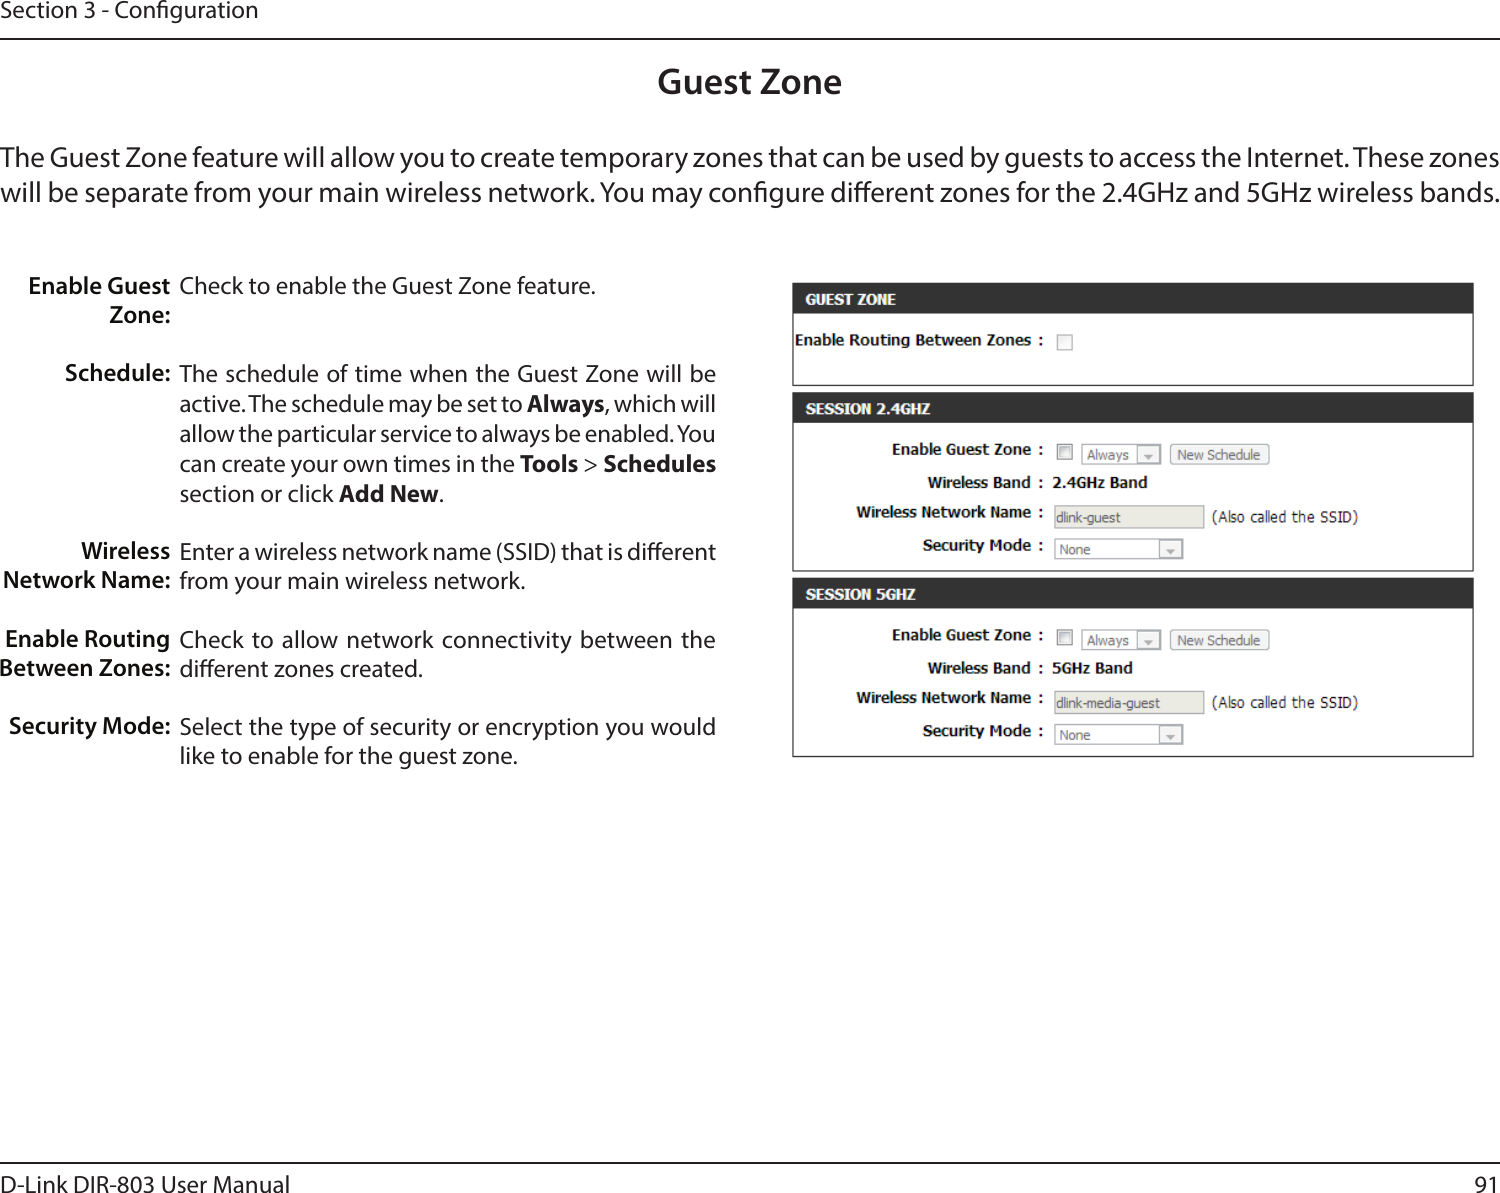 91D-Link DIR-803 User ManualSection 3 - CongurationGuest ZoneCheck to enable the Guest Zone feature. The schedule of time when the Guest Zone will be active. The schedule may be set to Always, which will allow the particular service to always be enabled. You can create your own times in the Tools &gt; Schedules section or click Add New.Enter a wireless network name (SSID) that is dierent from your main wireless network.Check to allow network connectivity between the dierent zones created. Select the type of security or encryption you would like to enable for the guest zone.  Enable Guest Zone:Schedule:Wireless Network Name:Enable Routing Between Zones:Security Mode:The Guest Zone feature will allow you to create temporary zones that can be used by guests to access the Internet. These zones will be separate from your main wireless network. You may congure dierent zones for the 2.4GHz and 5GHz wireless bands.